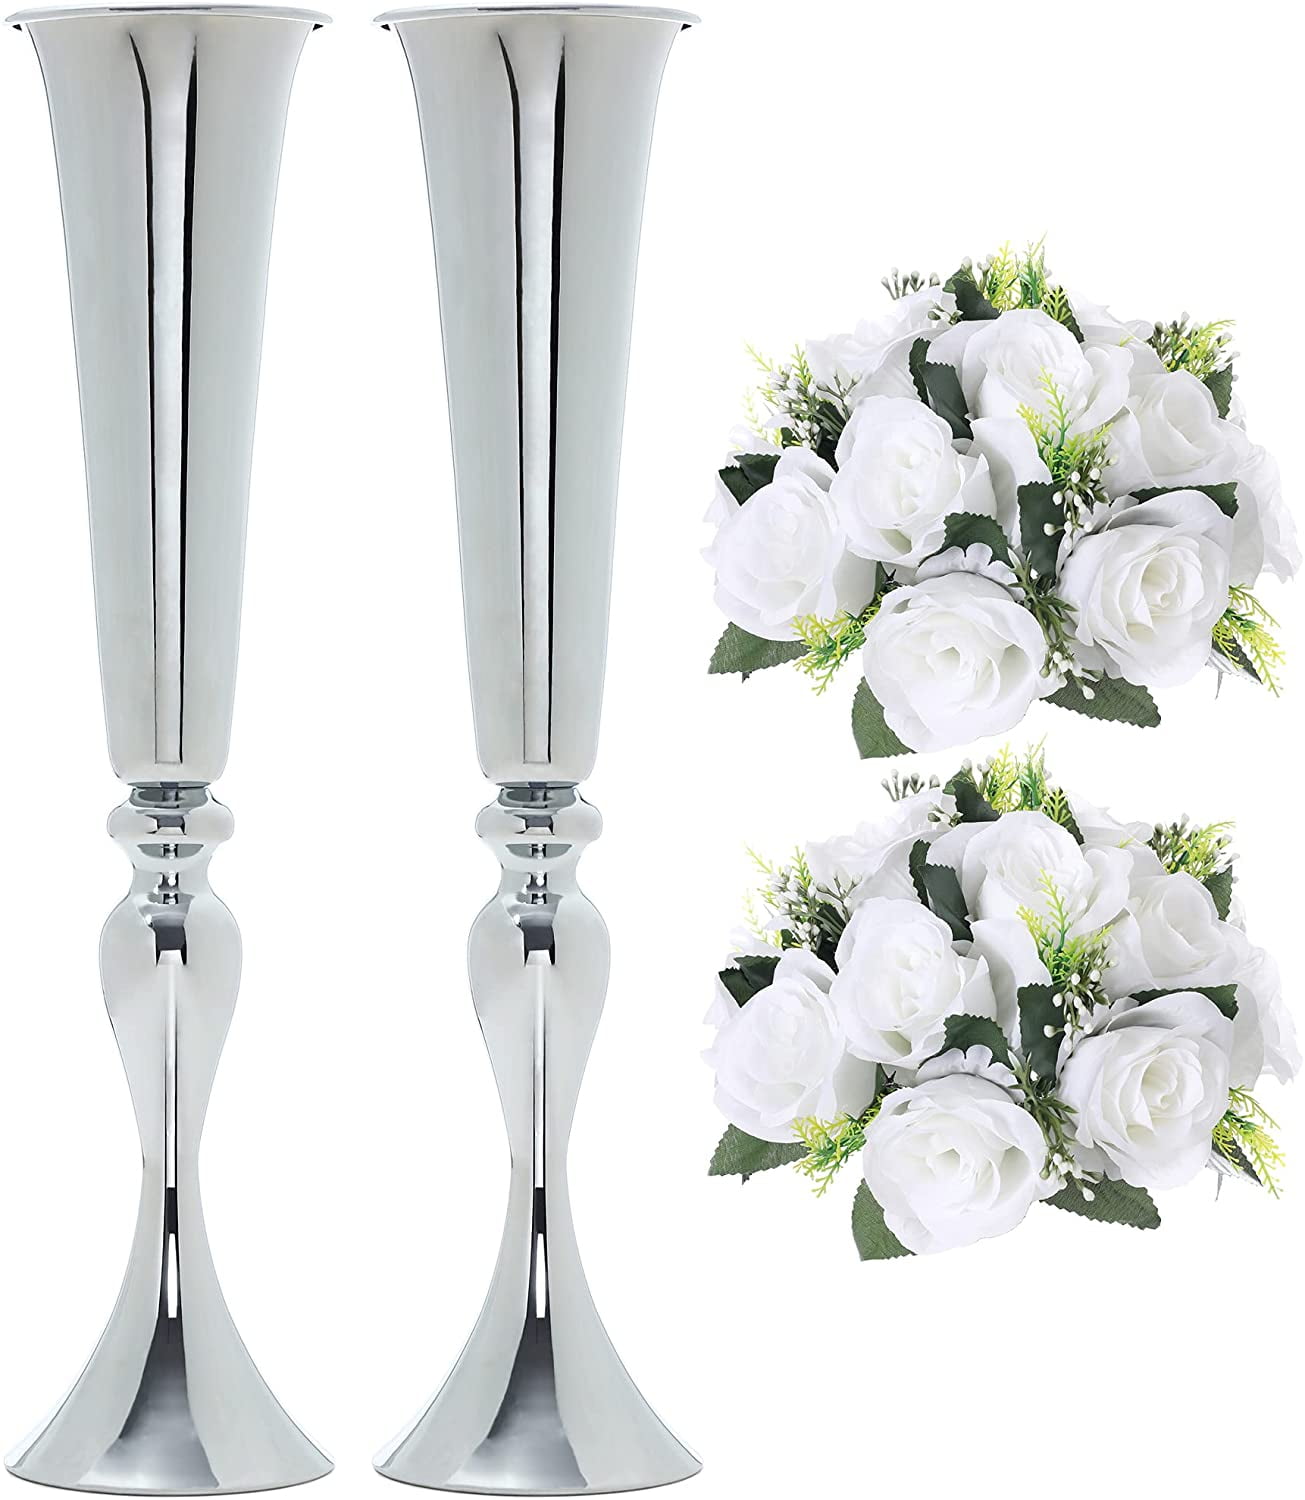 2 Pcs Metal Flower Holder and 2 Pcs Artificial Flower Set for Home Event Decoration White